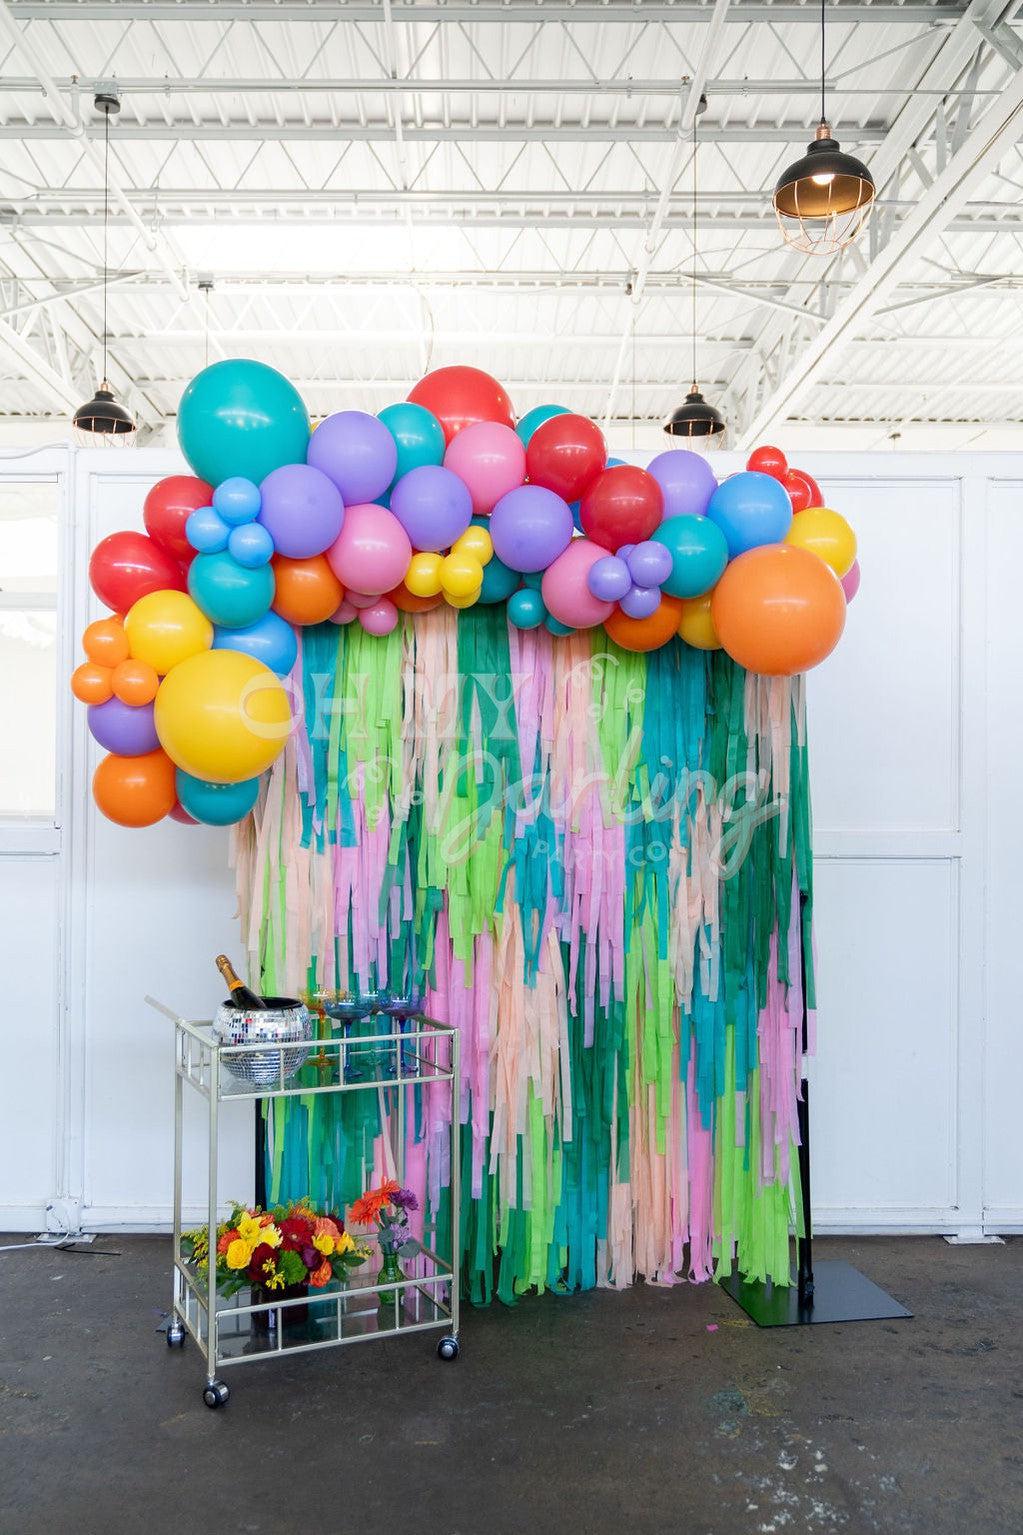 Tropical Twist Fringe Backdrop-Fringe Backdrop-Party Decor-Oh My Darling Party Co-Oh My Darling Party Co-backdrops for party, balloon garlands, boy party, bubblegum, default, dinosaur, fringe garland, Fringe Streamers, girl party, gn party, GREEN BACKDROP, GREEN BACKDROPS, kelly green, Kids Birthday, Kids Party, lime green, little llama party, llama, llama birthday, llama napkins, OMDPC, ORANGE BACKDROP, party animals, party backdrops, pastels, peach, Pink, PINK BACKDROP, pink party, spring, st patrcks, sta